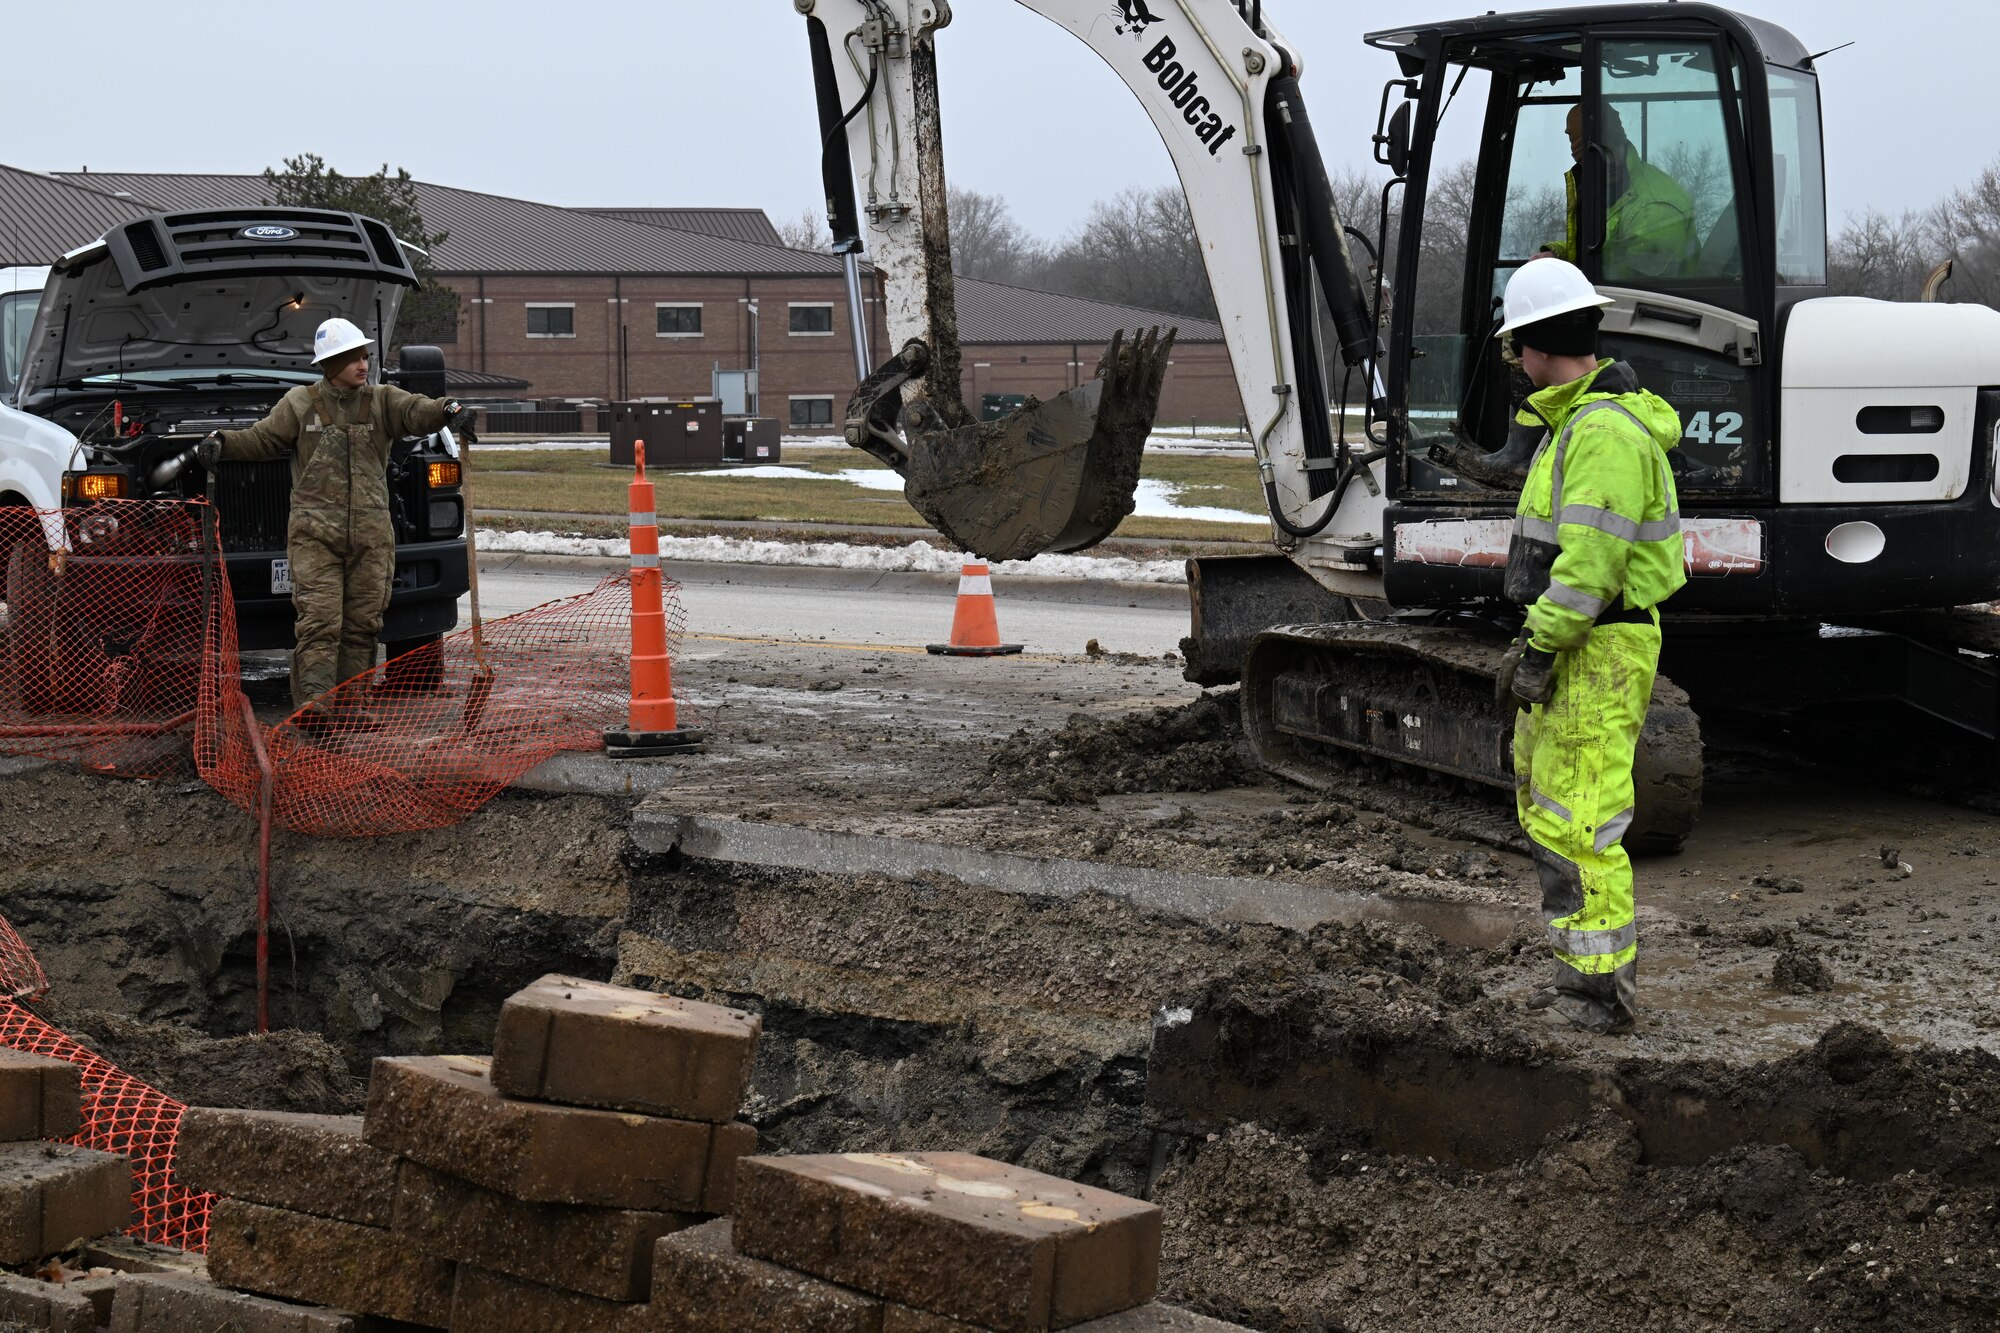 U.S. Airmen assigned to the 509th Civil Engineer Squadron work together to excavate dirt and pieces of road away from a burst water main at Whiteman Air Force Base, Mo., Jan 25, 2024. To repair the water main, equipment operators need to cut away pieces of road and move dirt away from the site so plumbers can repair the pipe. (U.S. Air Force photo by Airman 1st Class Matthew S. Domingos)